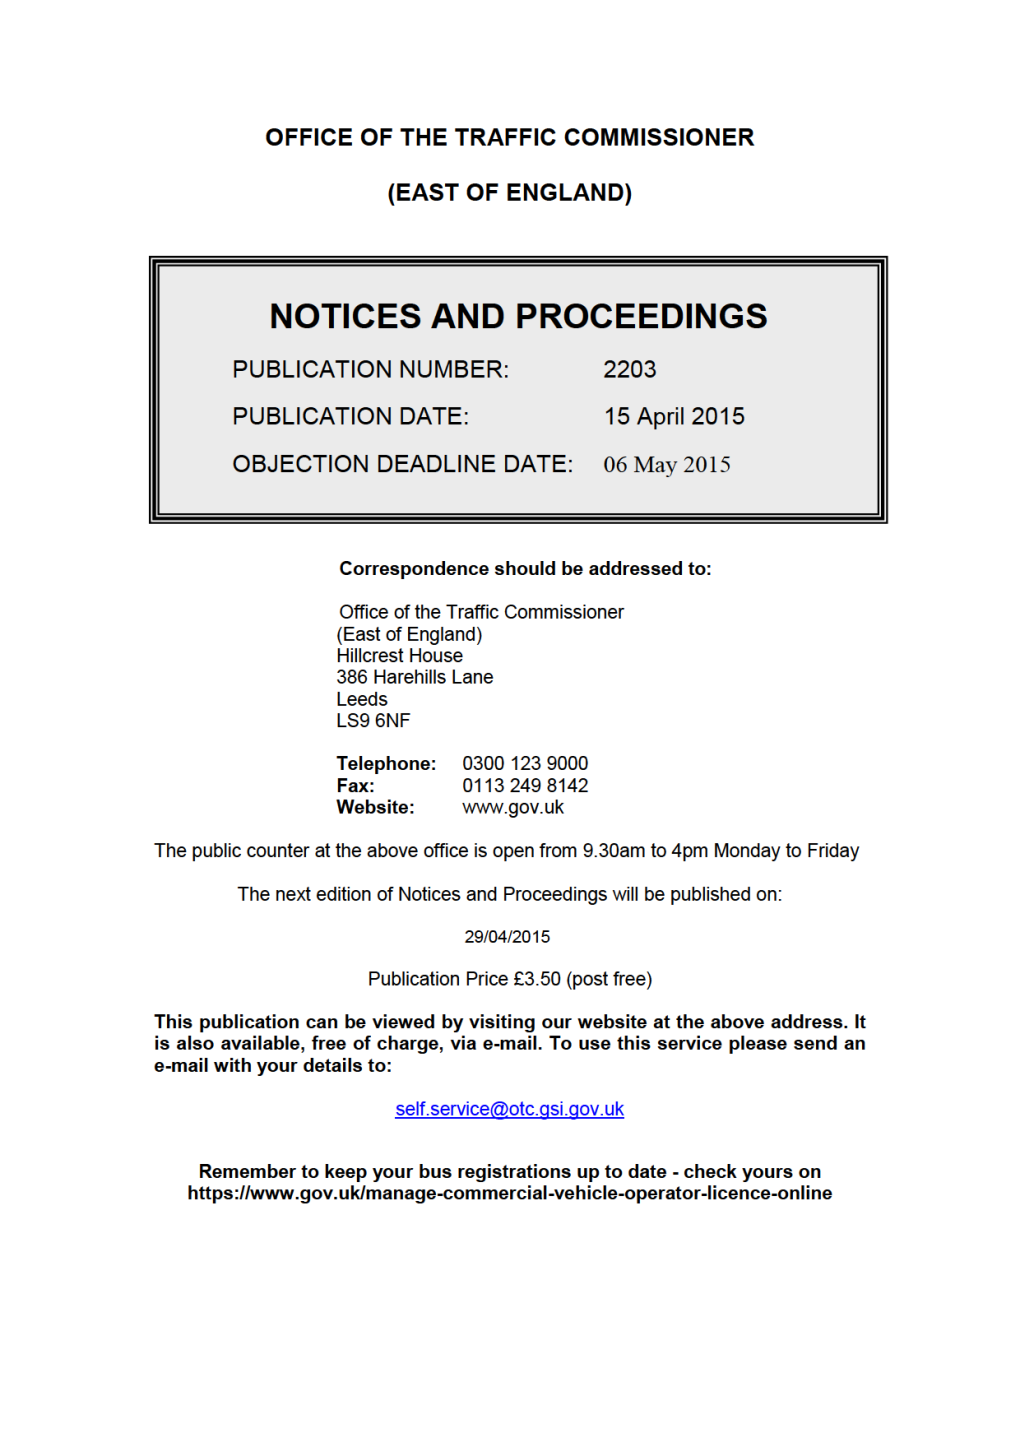 NOTICES and PROCEEDINGS 15 April 2015